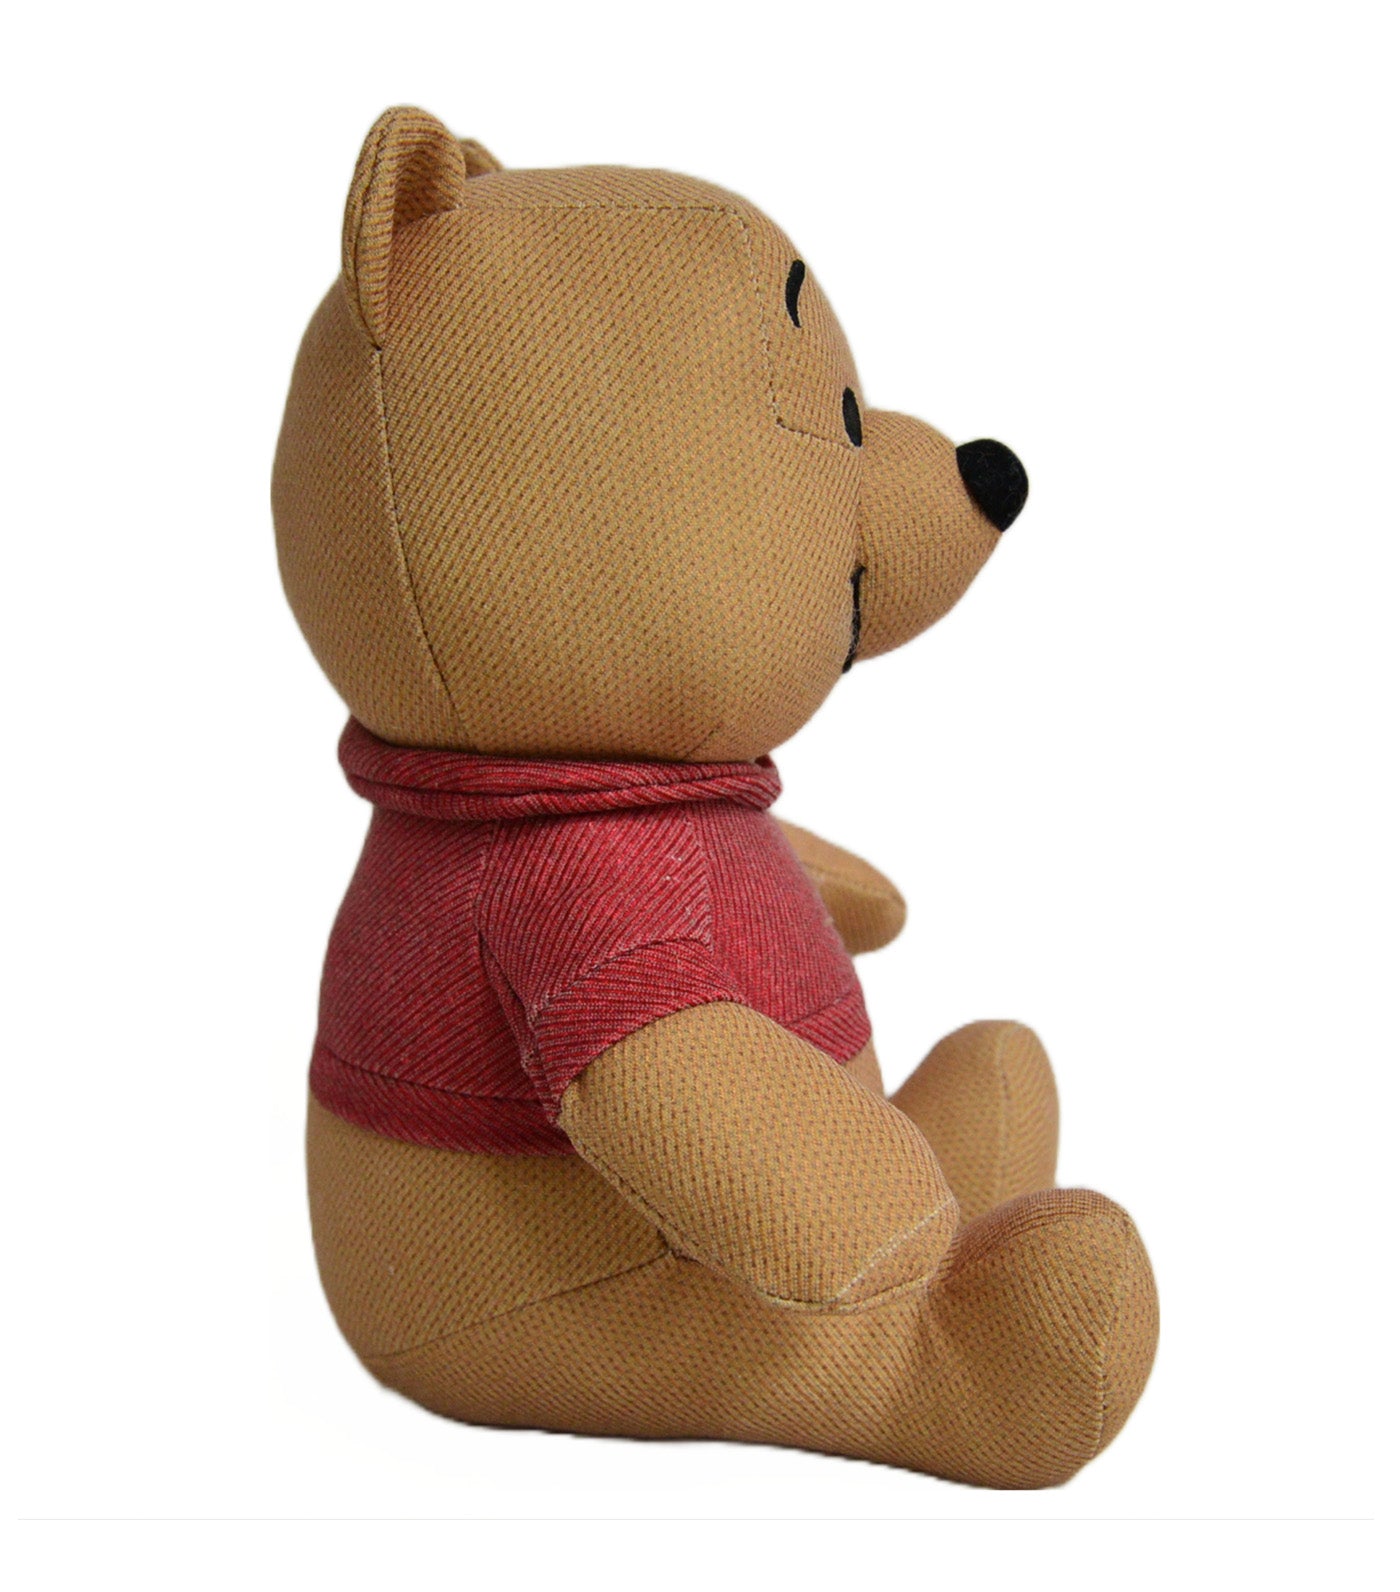 D100 Vintage Collection Winnie the Pooh Plush - 8in